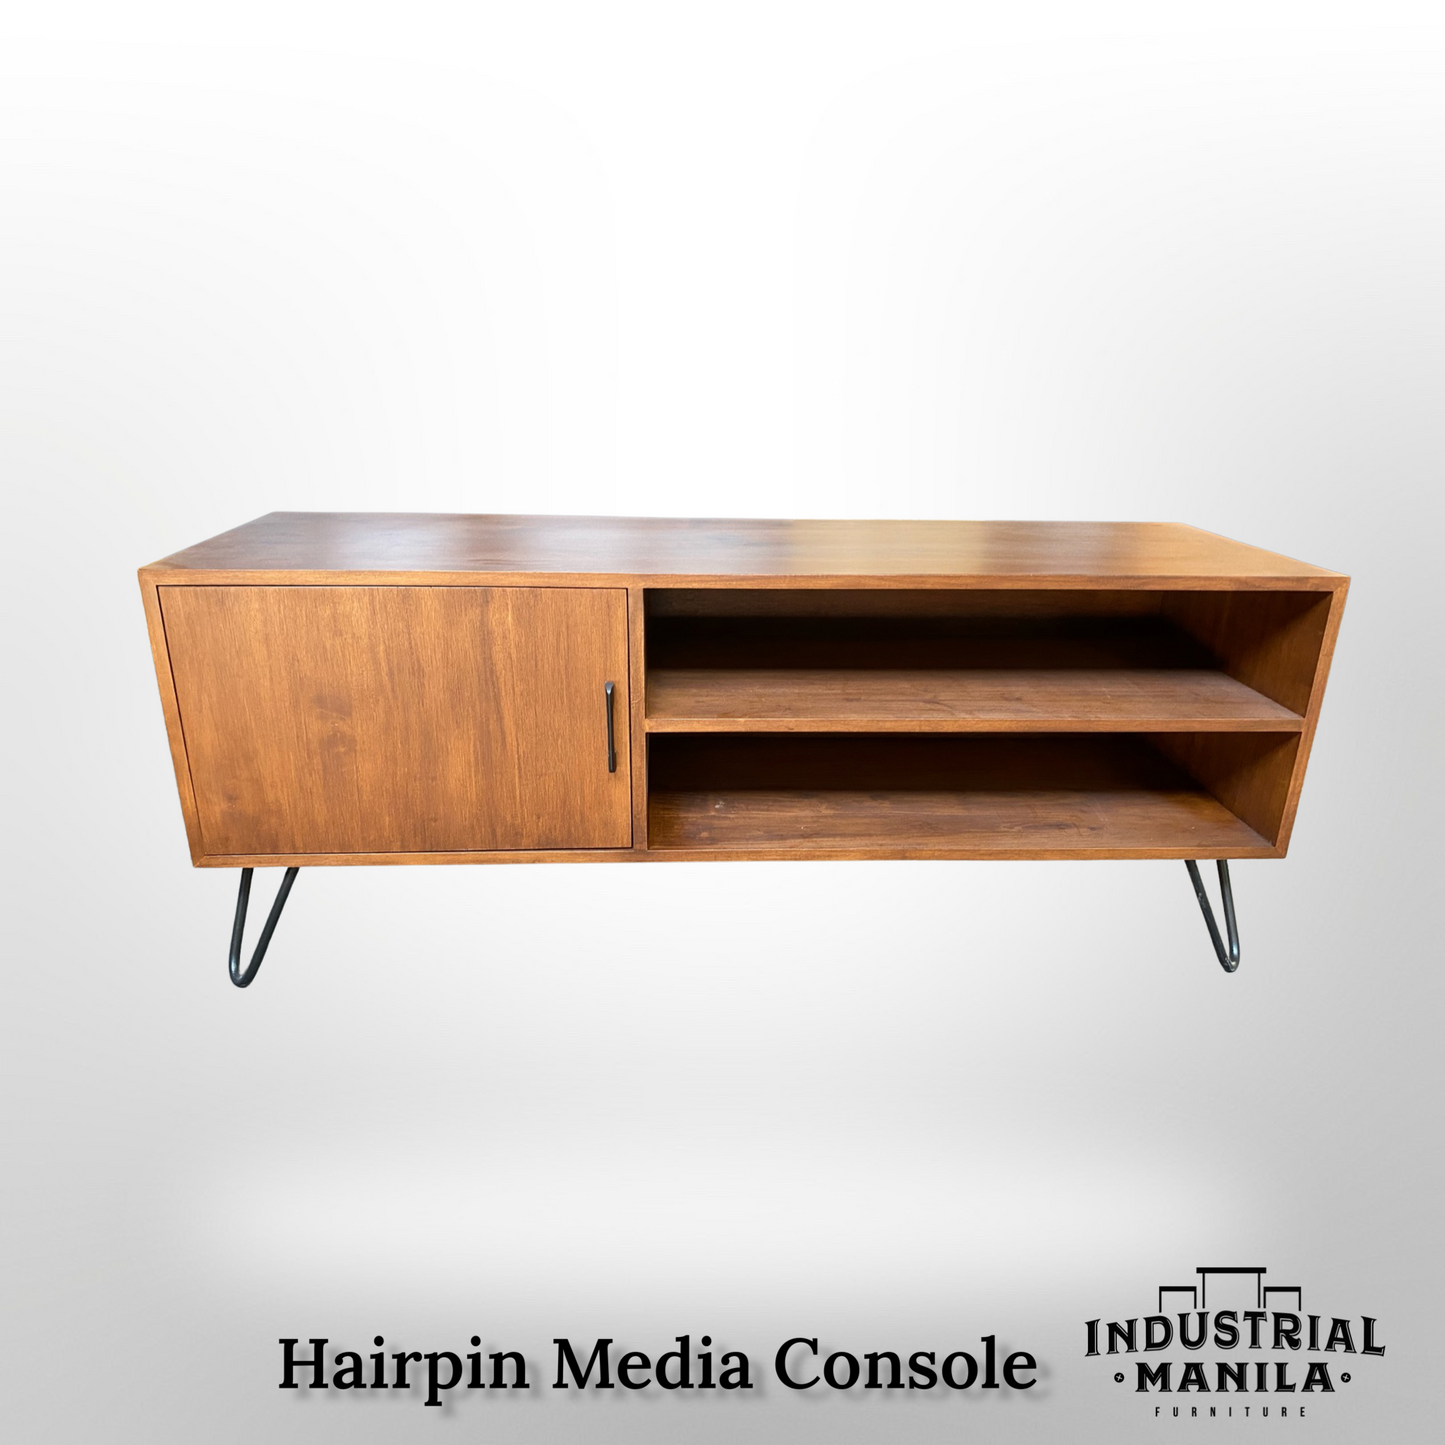 Hairpin Media Console